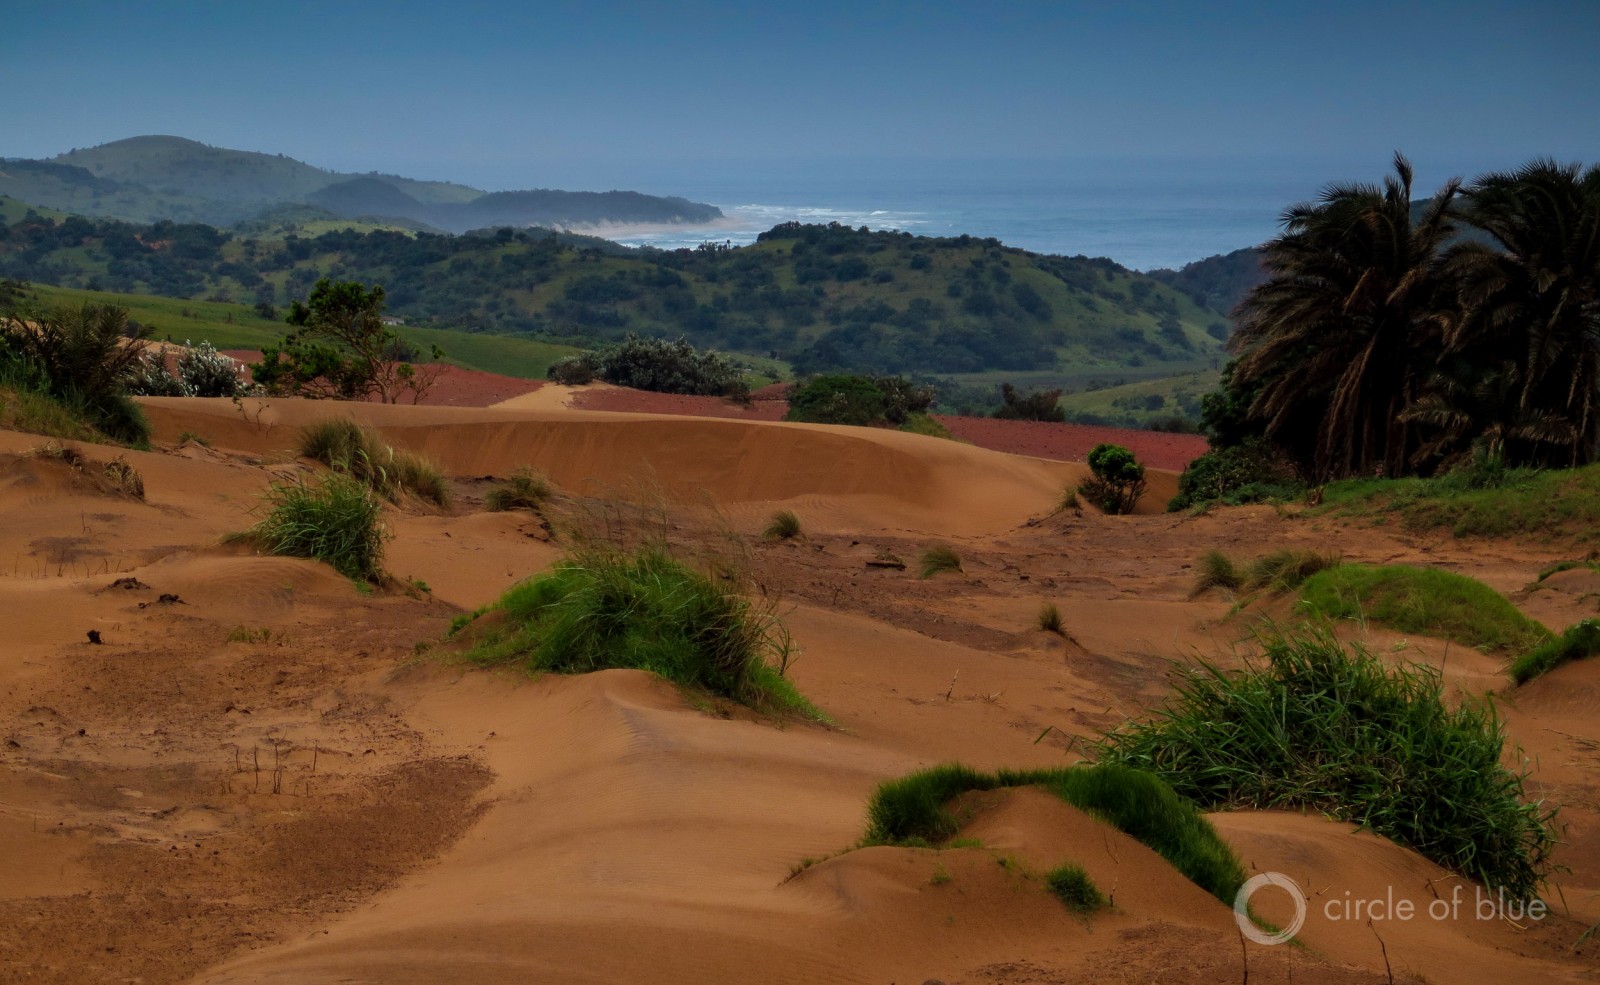 Mineral Commodities Ltd., an Australian developer, proposes to take control of 2,867 hectares of Wild Coast beach and dunes (nearly 7,100 acres) to produce 425,000 metric tons of processed titanium sands annually. Photo © Keith Schneider / Circle of Blue